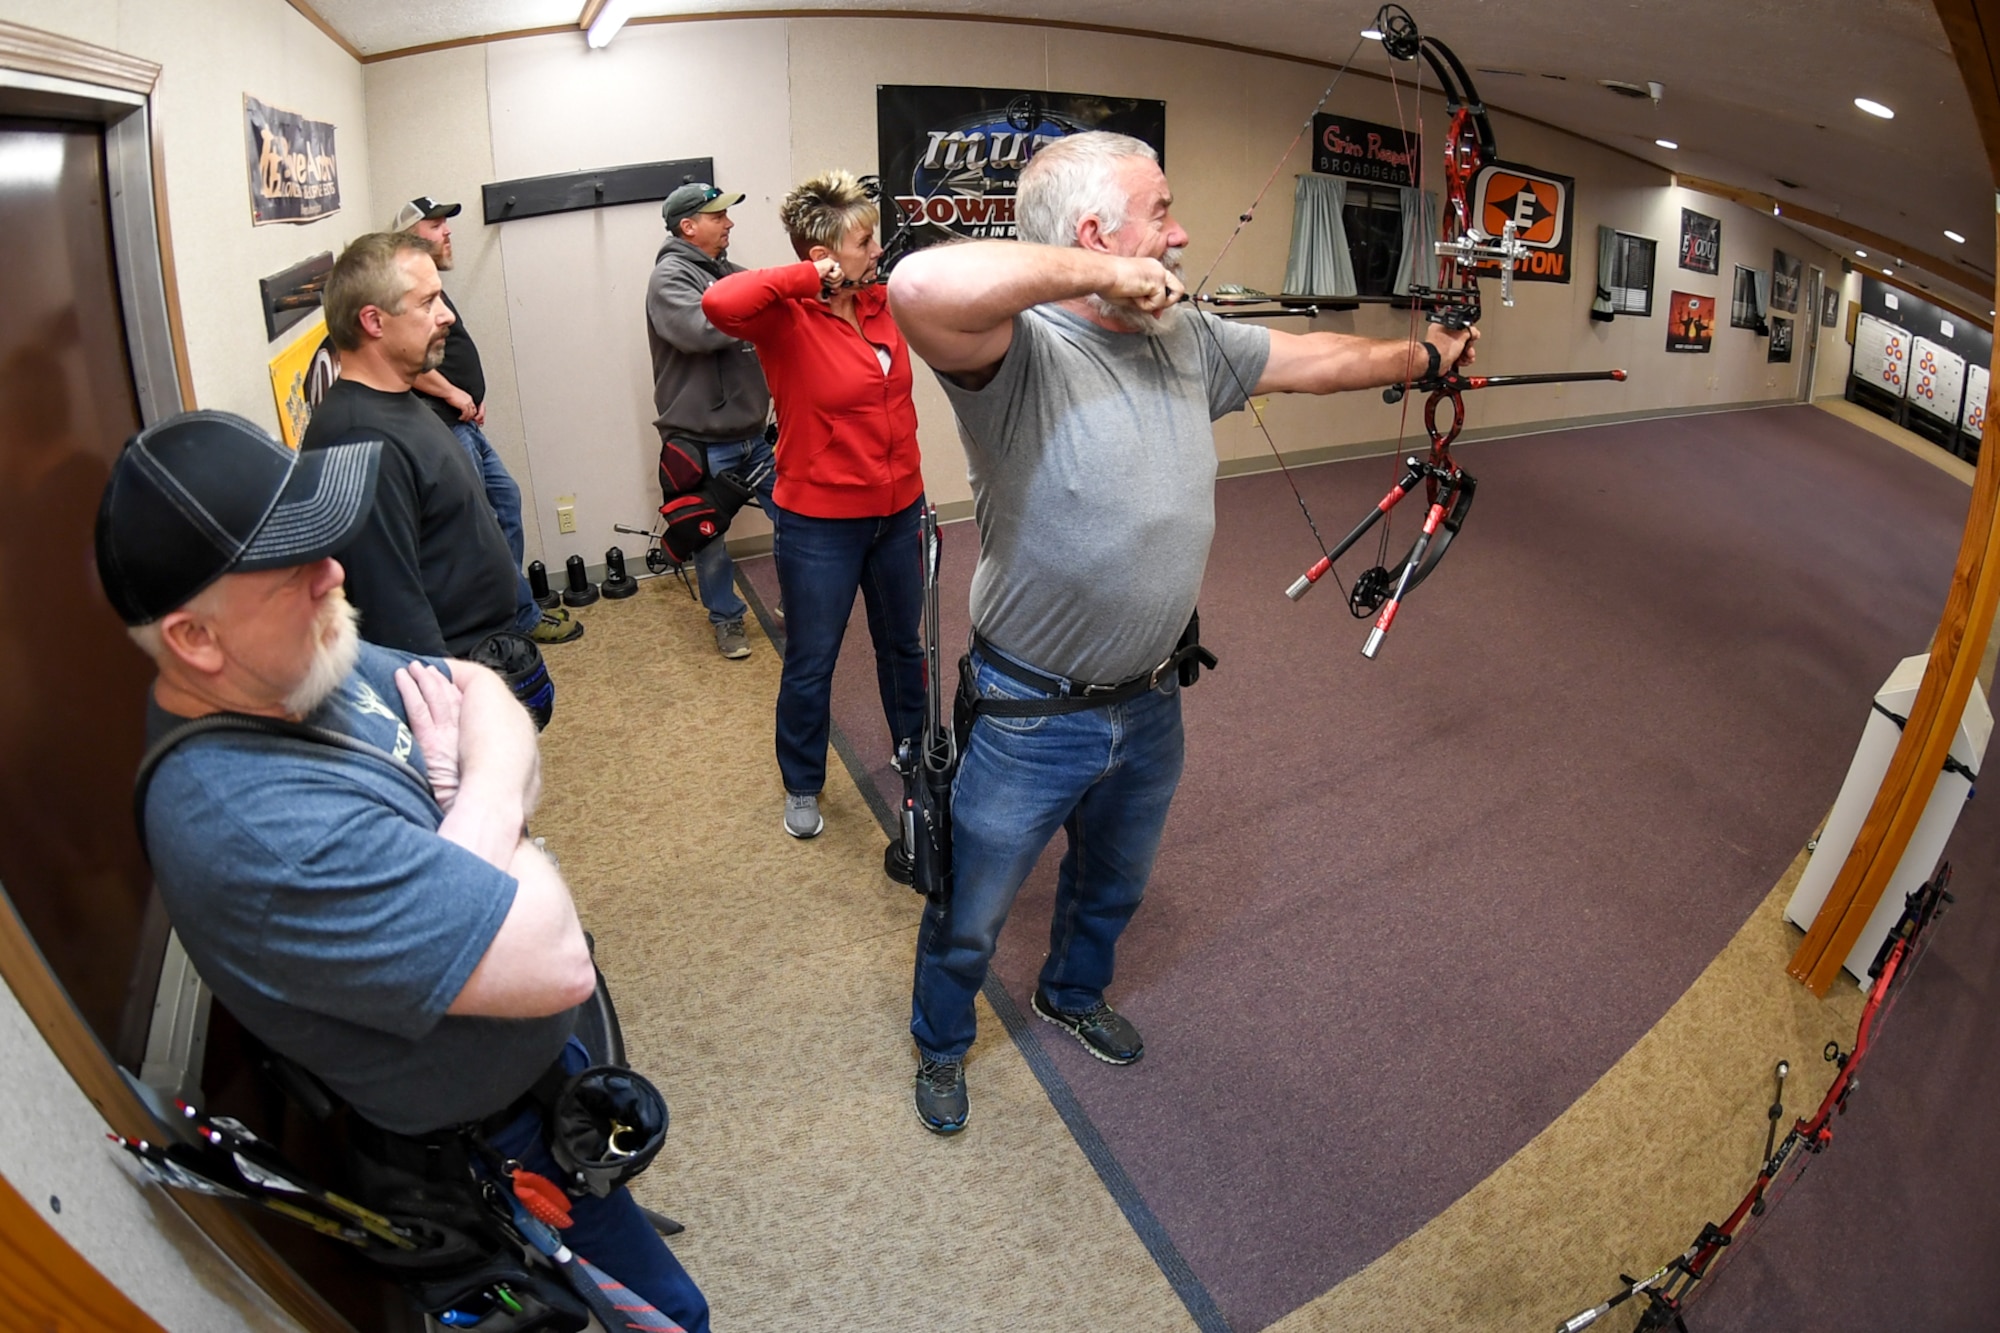 Hill Archery Club members take turns shooting their compound bows during a club league night Dec. 13, 2018, at Hill Air Force Base, Utah. The 20-yard indoor range at Hill’s archery clubhouse houses five lanes for shooting. There are also four different outdoor ranges. (U.S. Air Force photo by Cynthia Griggs)